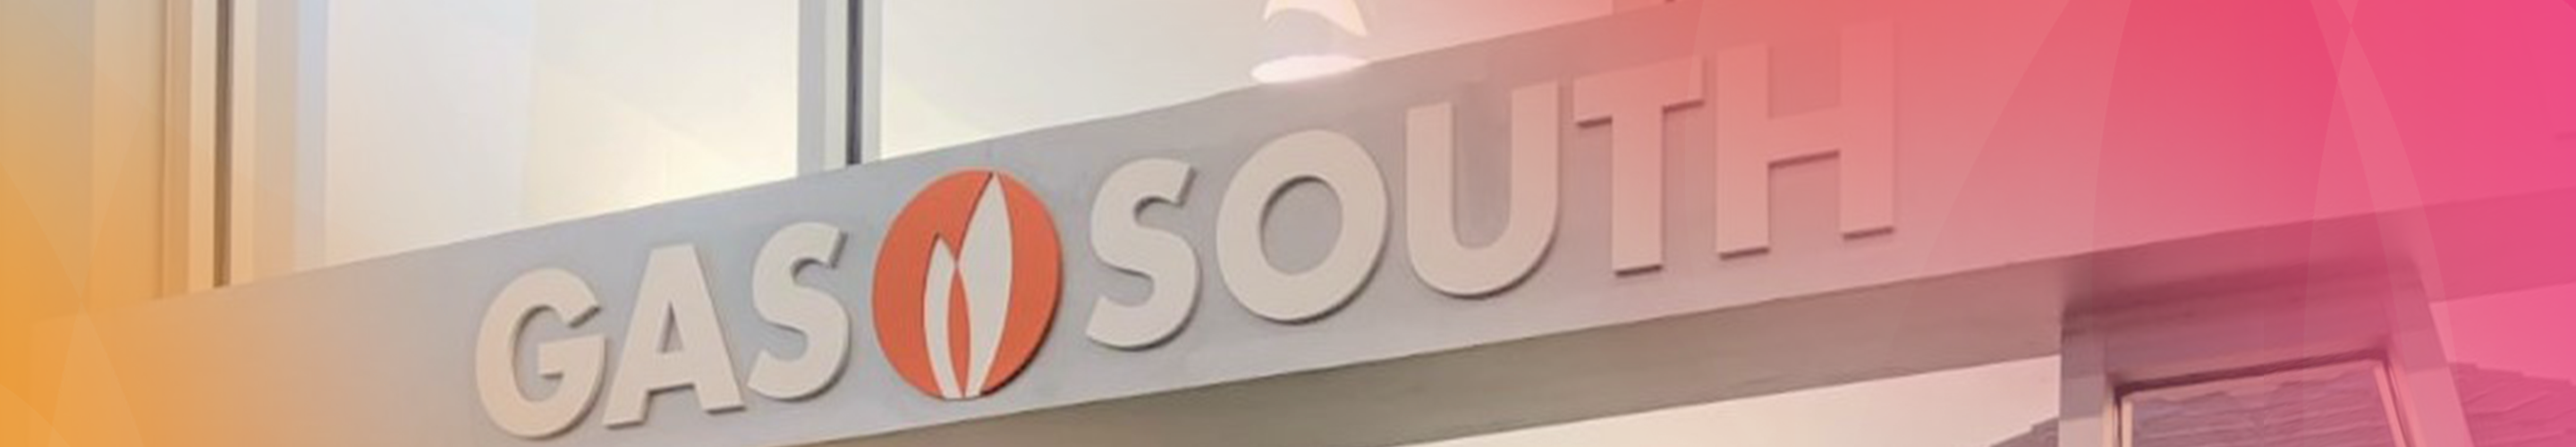 gas south logo on sign outside of a classroom